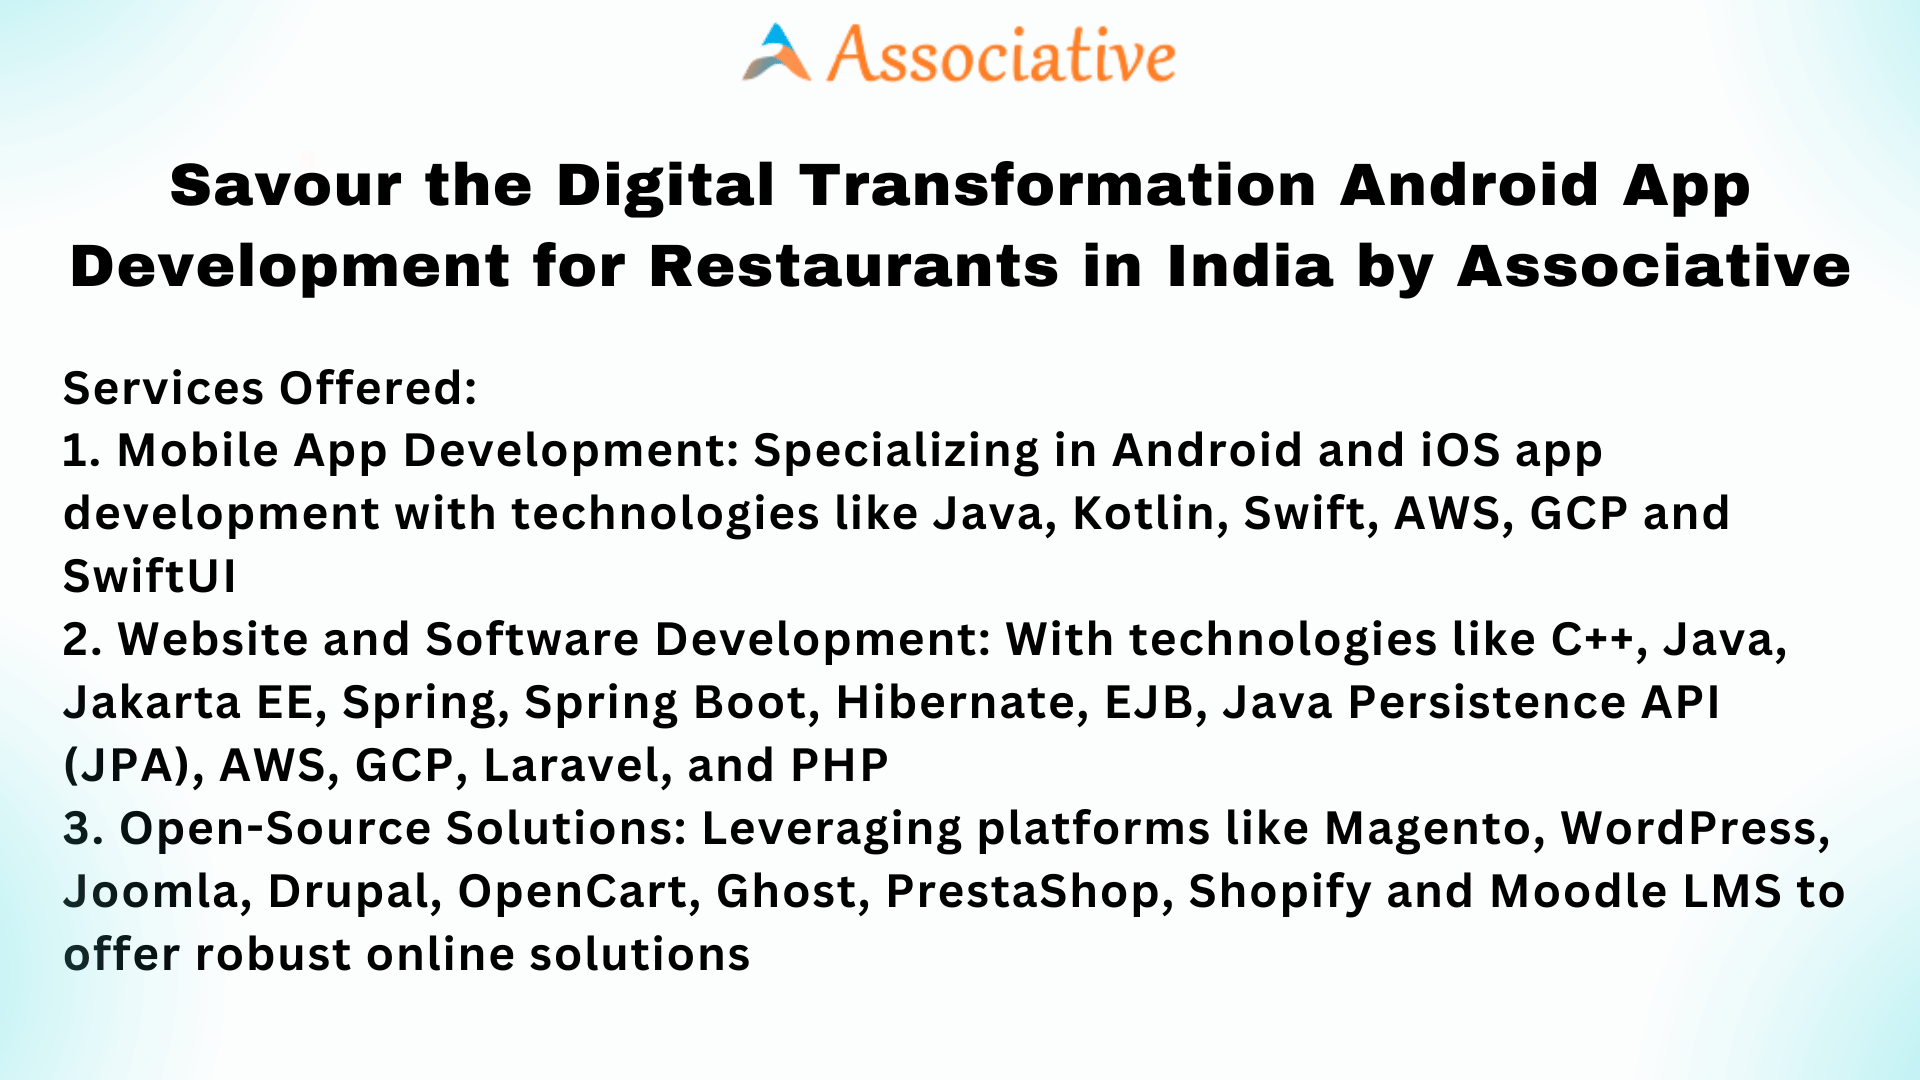 Savour the Digital Transformation Android App Development for Restaurants in India by Associative